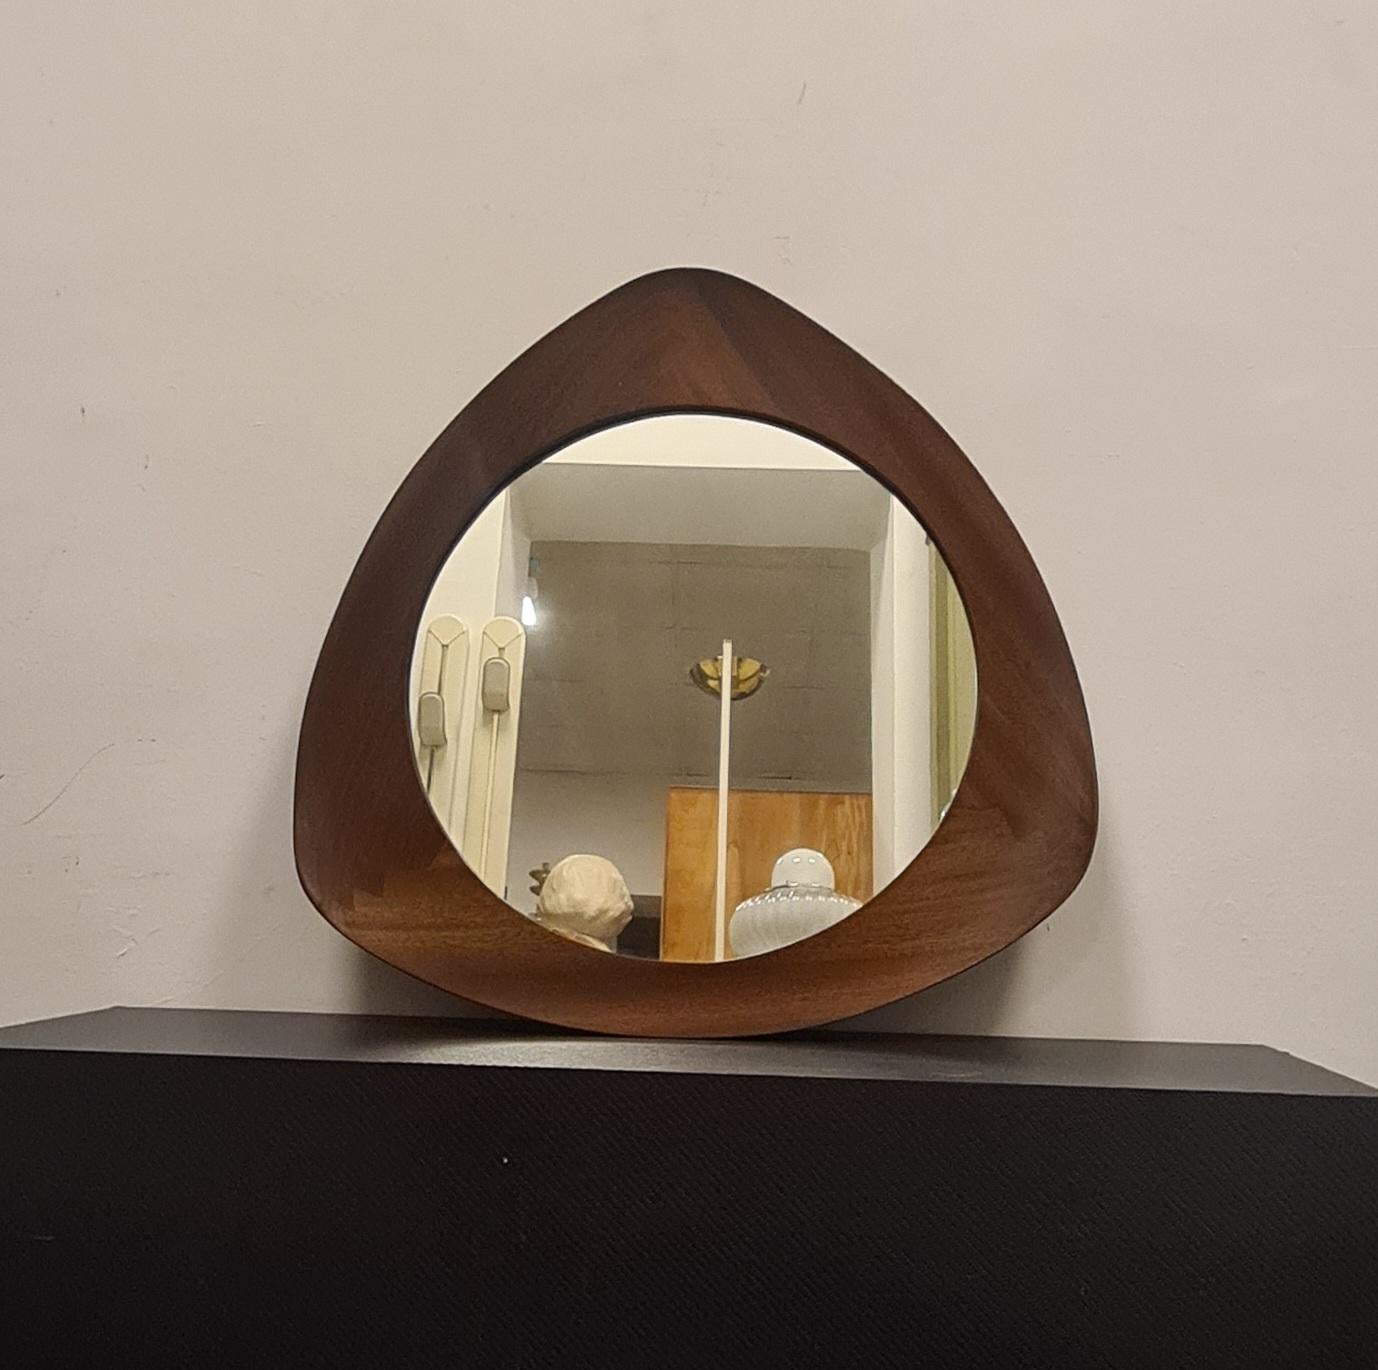 Oscar model mirror designed by Campo & Graffi.

Refined mirror with a curved triangular shape produced by Home Torino in 1958 to a design by Franco Campo and Carlo Graffi.

Rare in that the collaboration between the two designers and the furniture